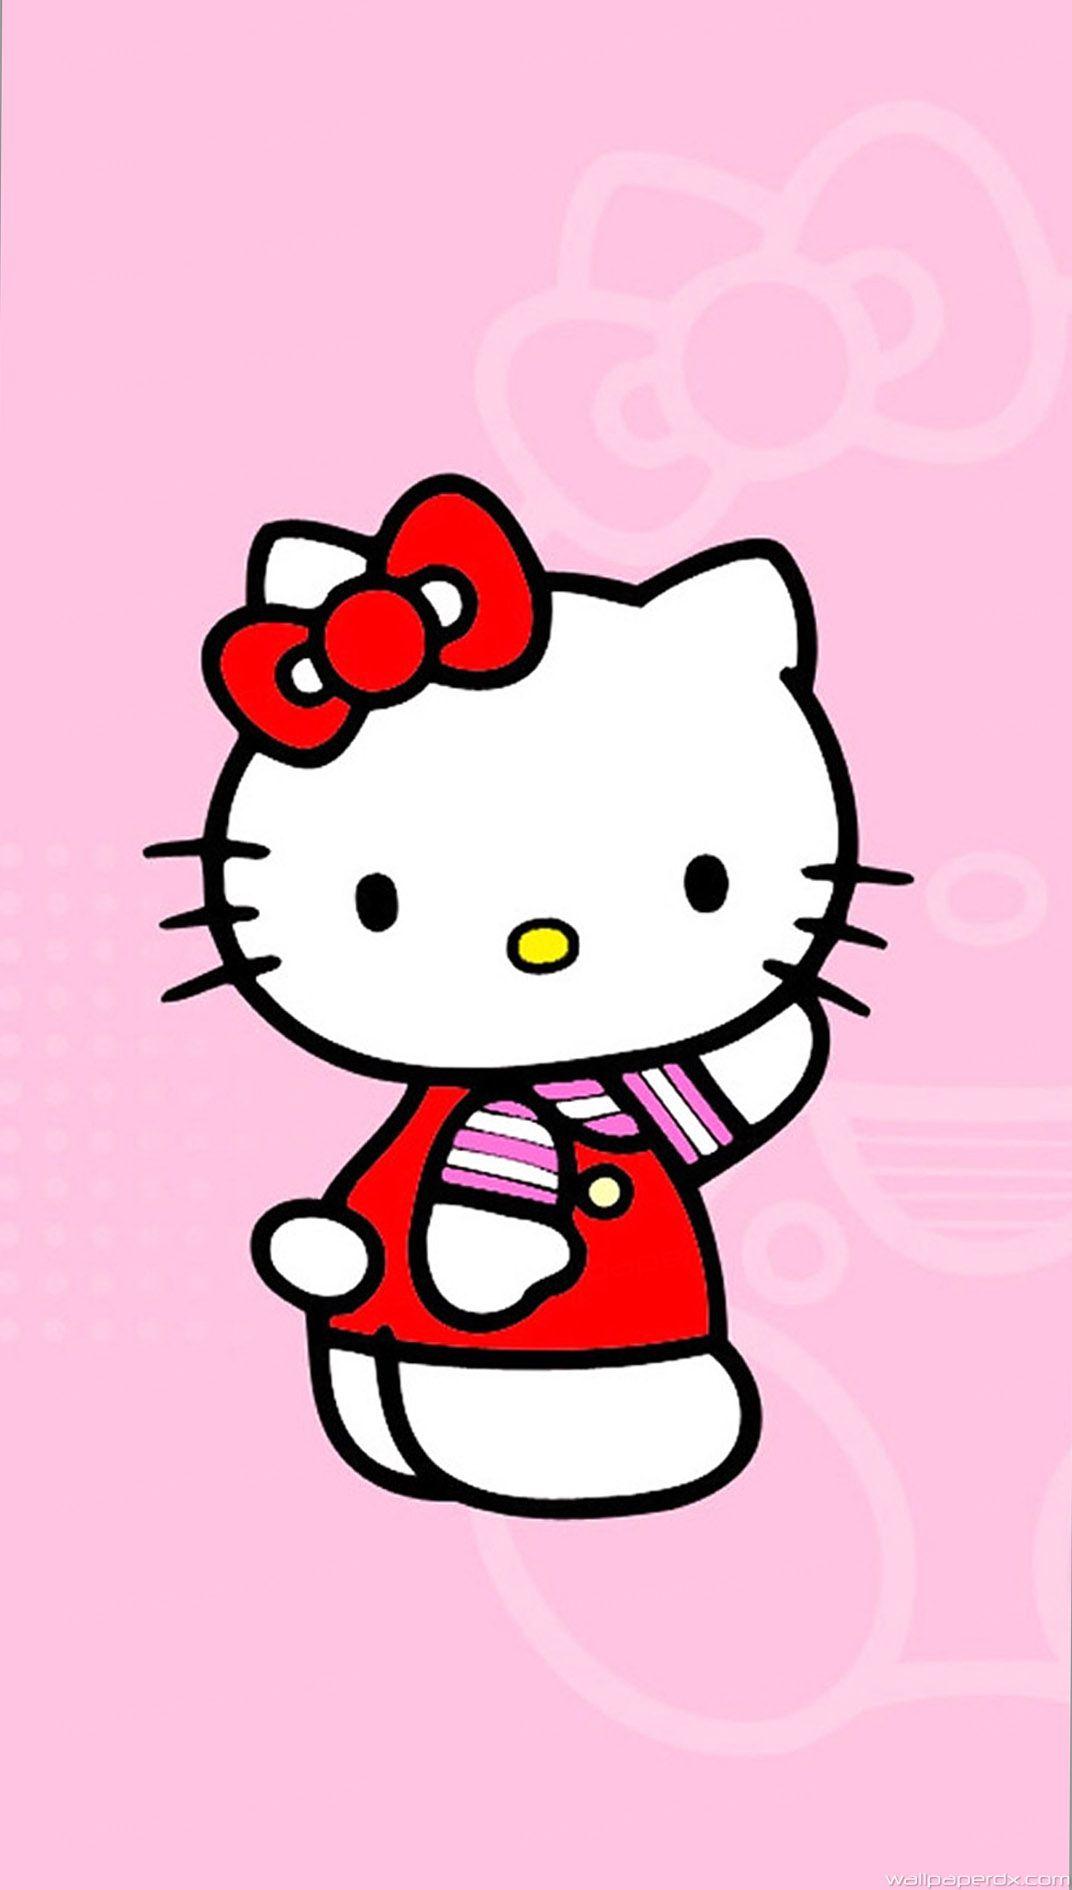 Hello Kitty iPhone Wallpapers - Top Free Hello Kitty iPhone Backgrounds ...